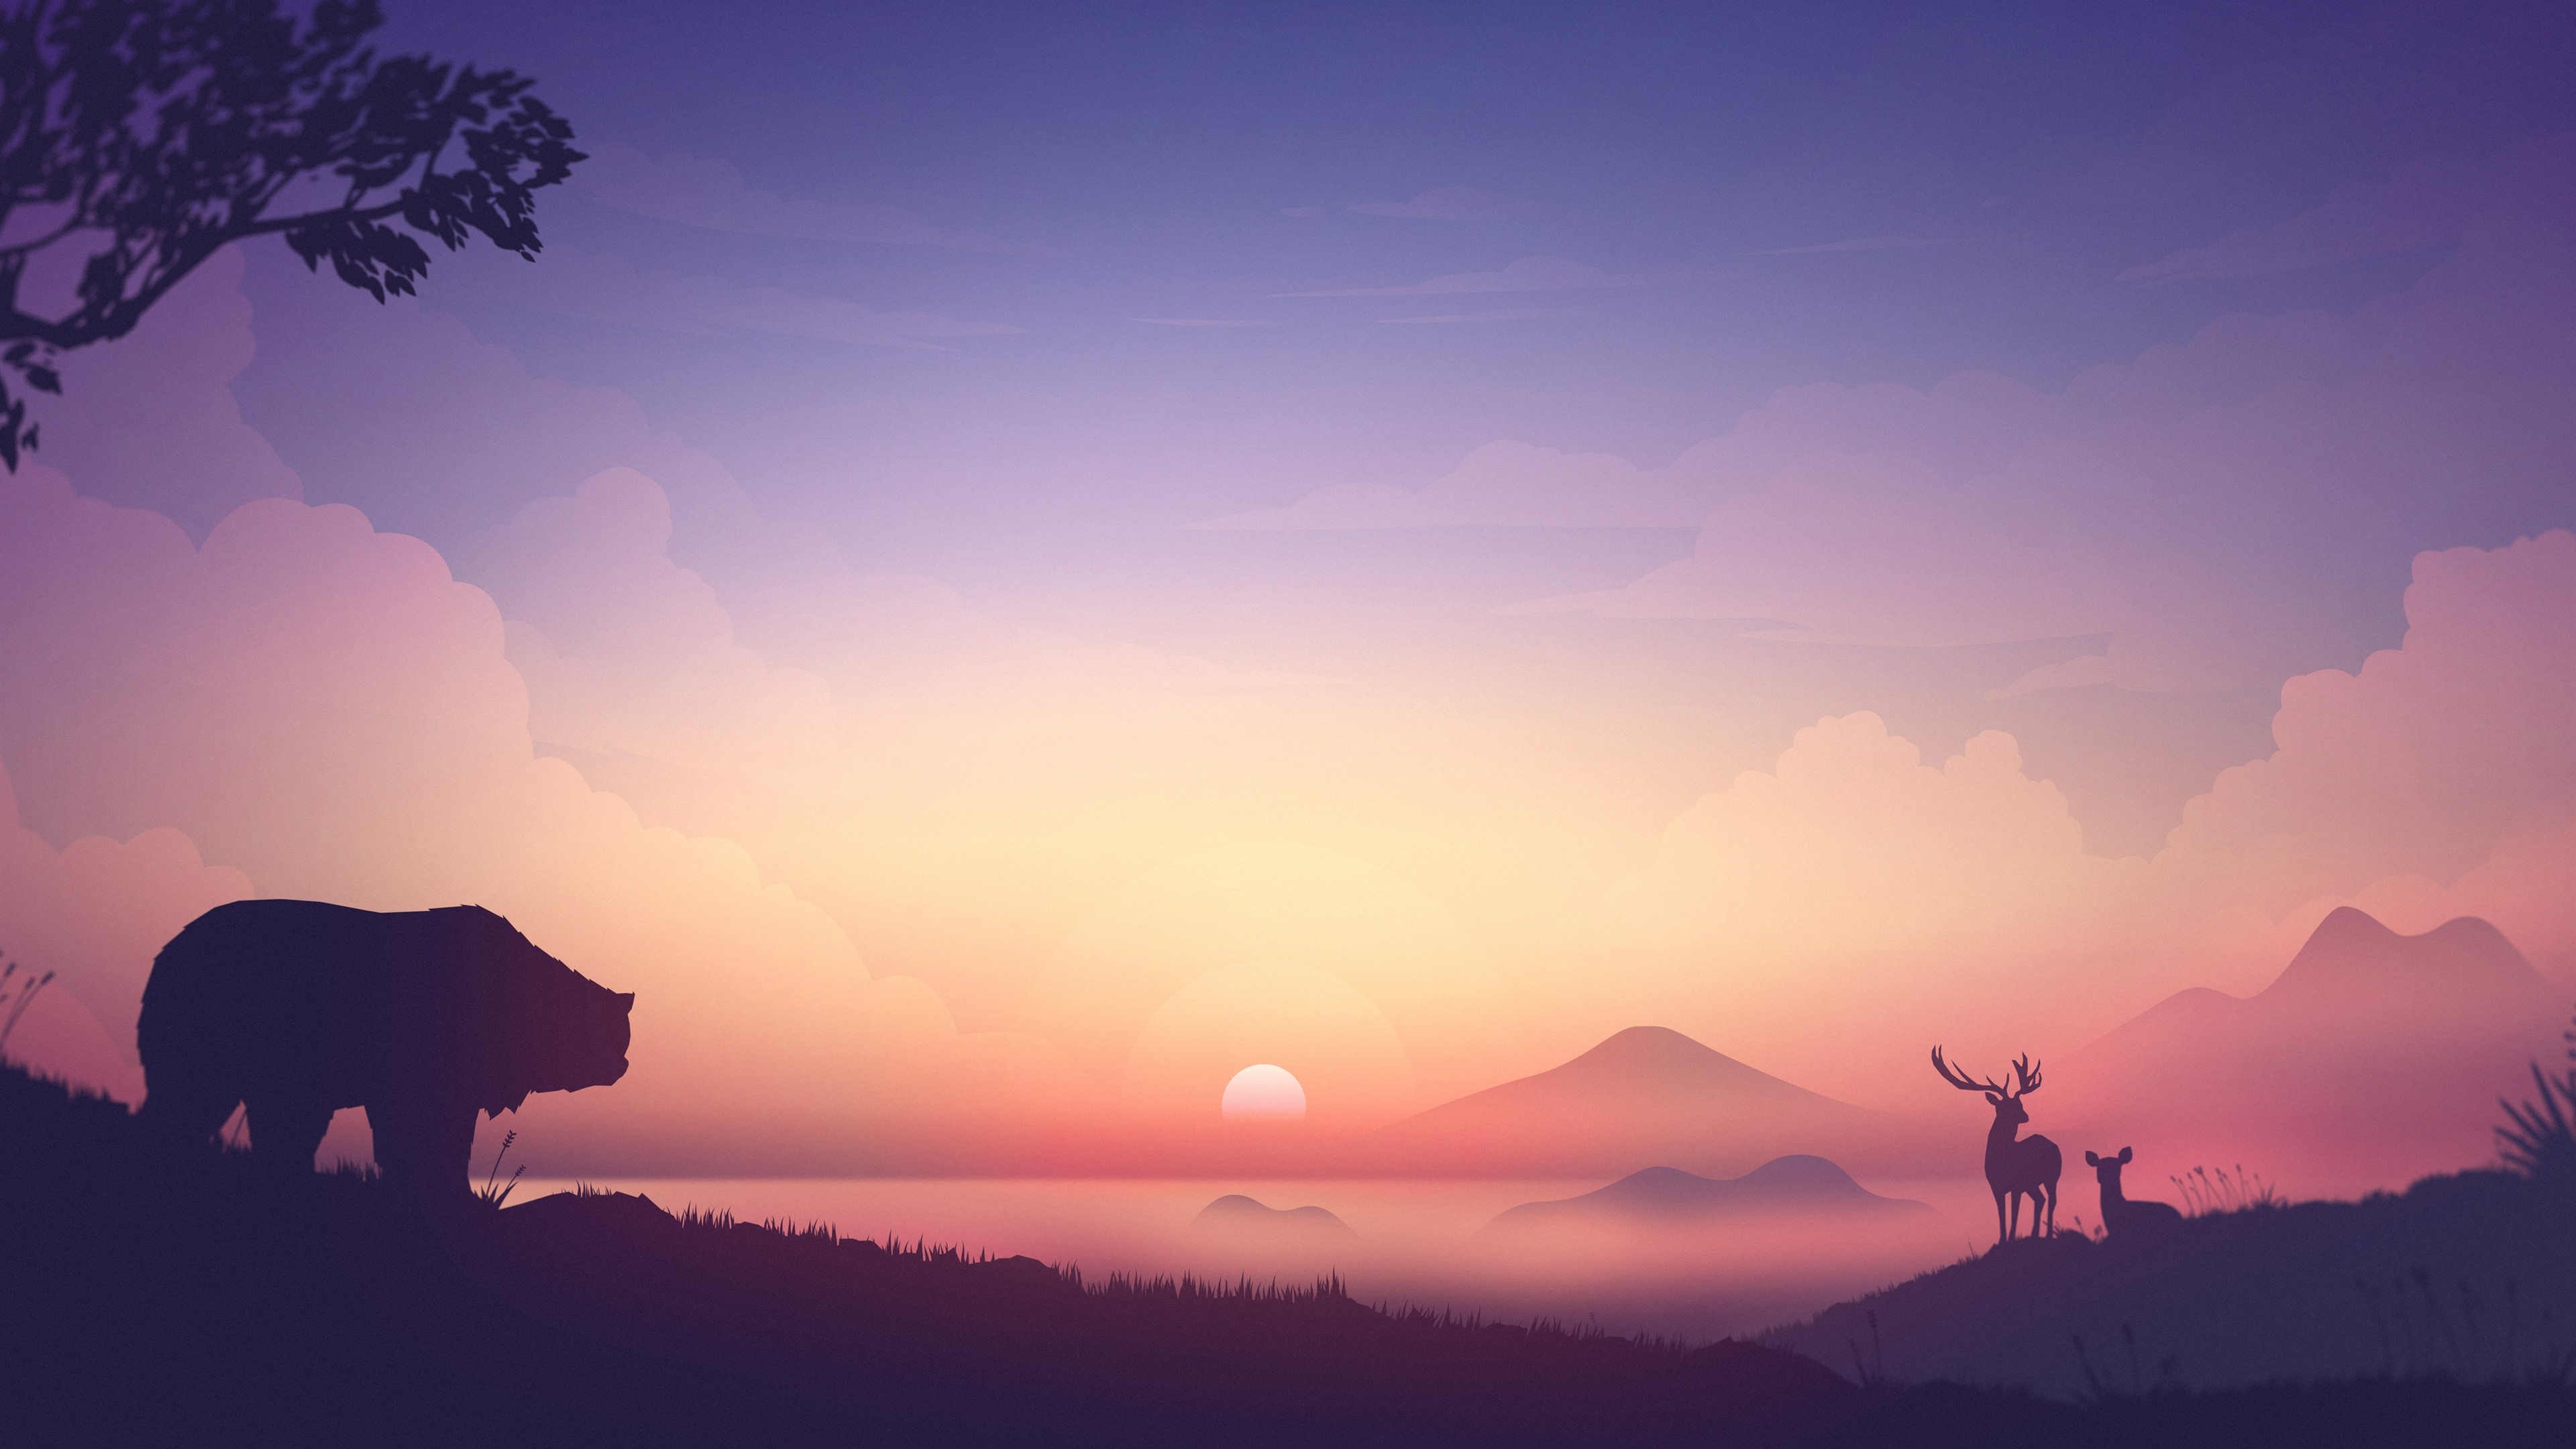 Wallpaper Bear and deers, mountains, sunset, art picture